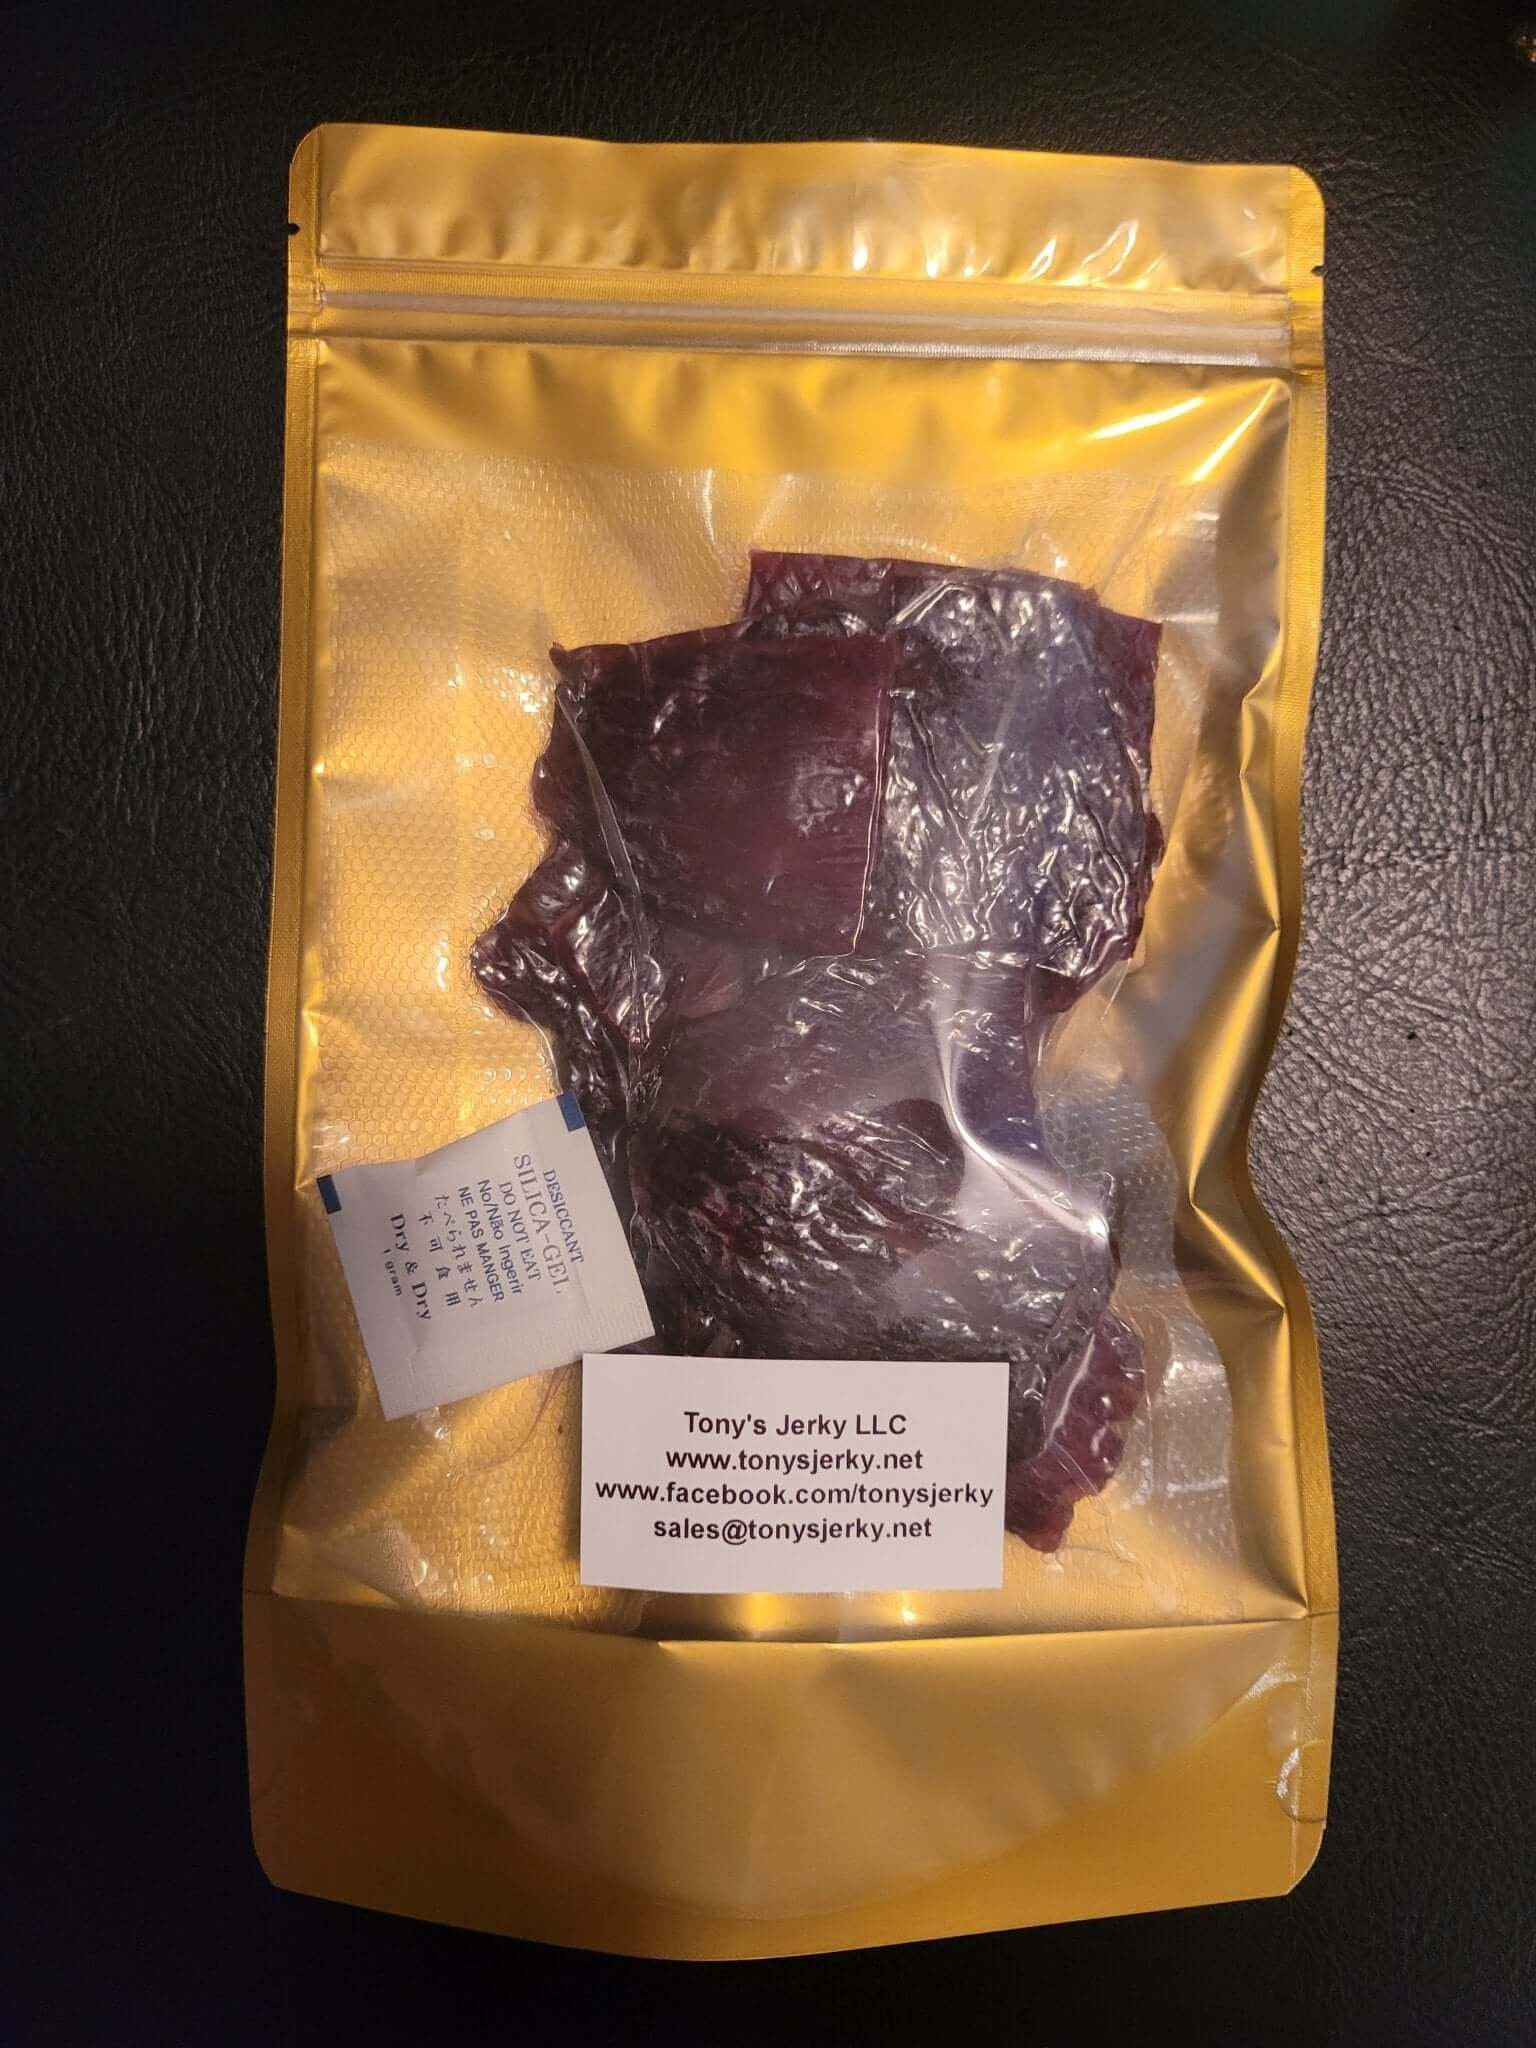 peppered flavored beef jerky